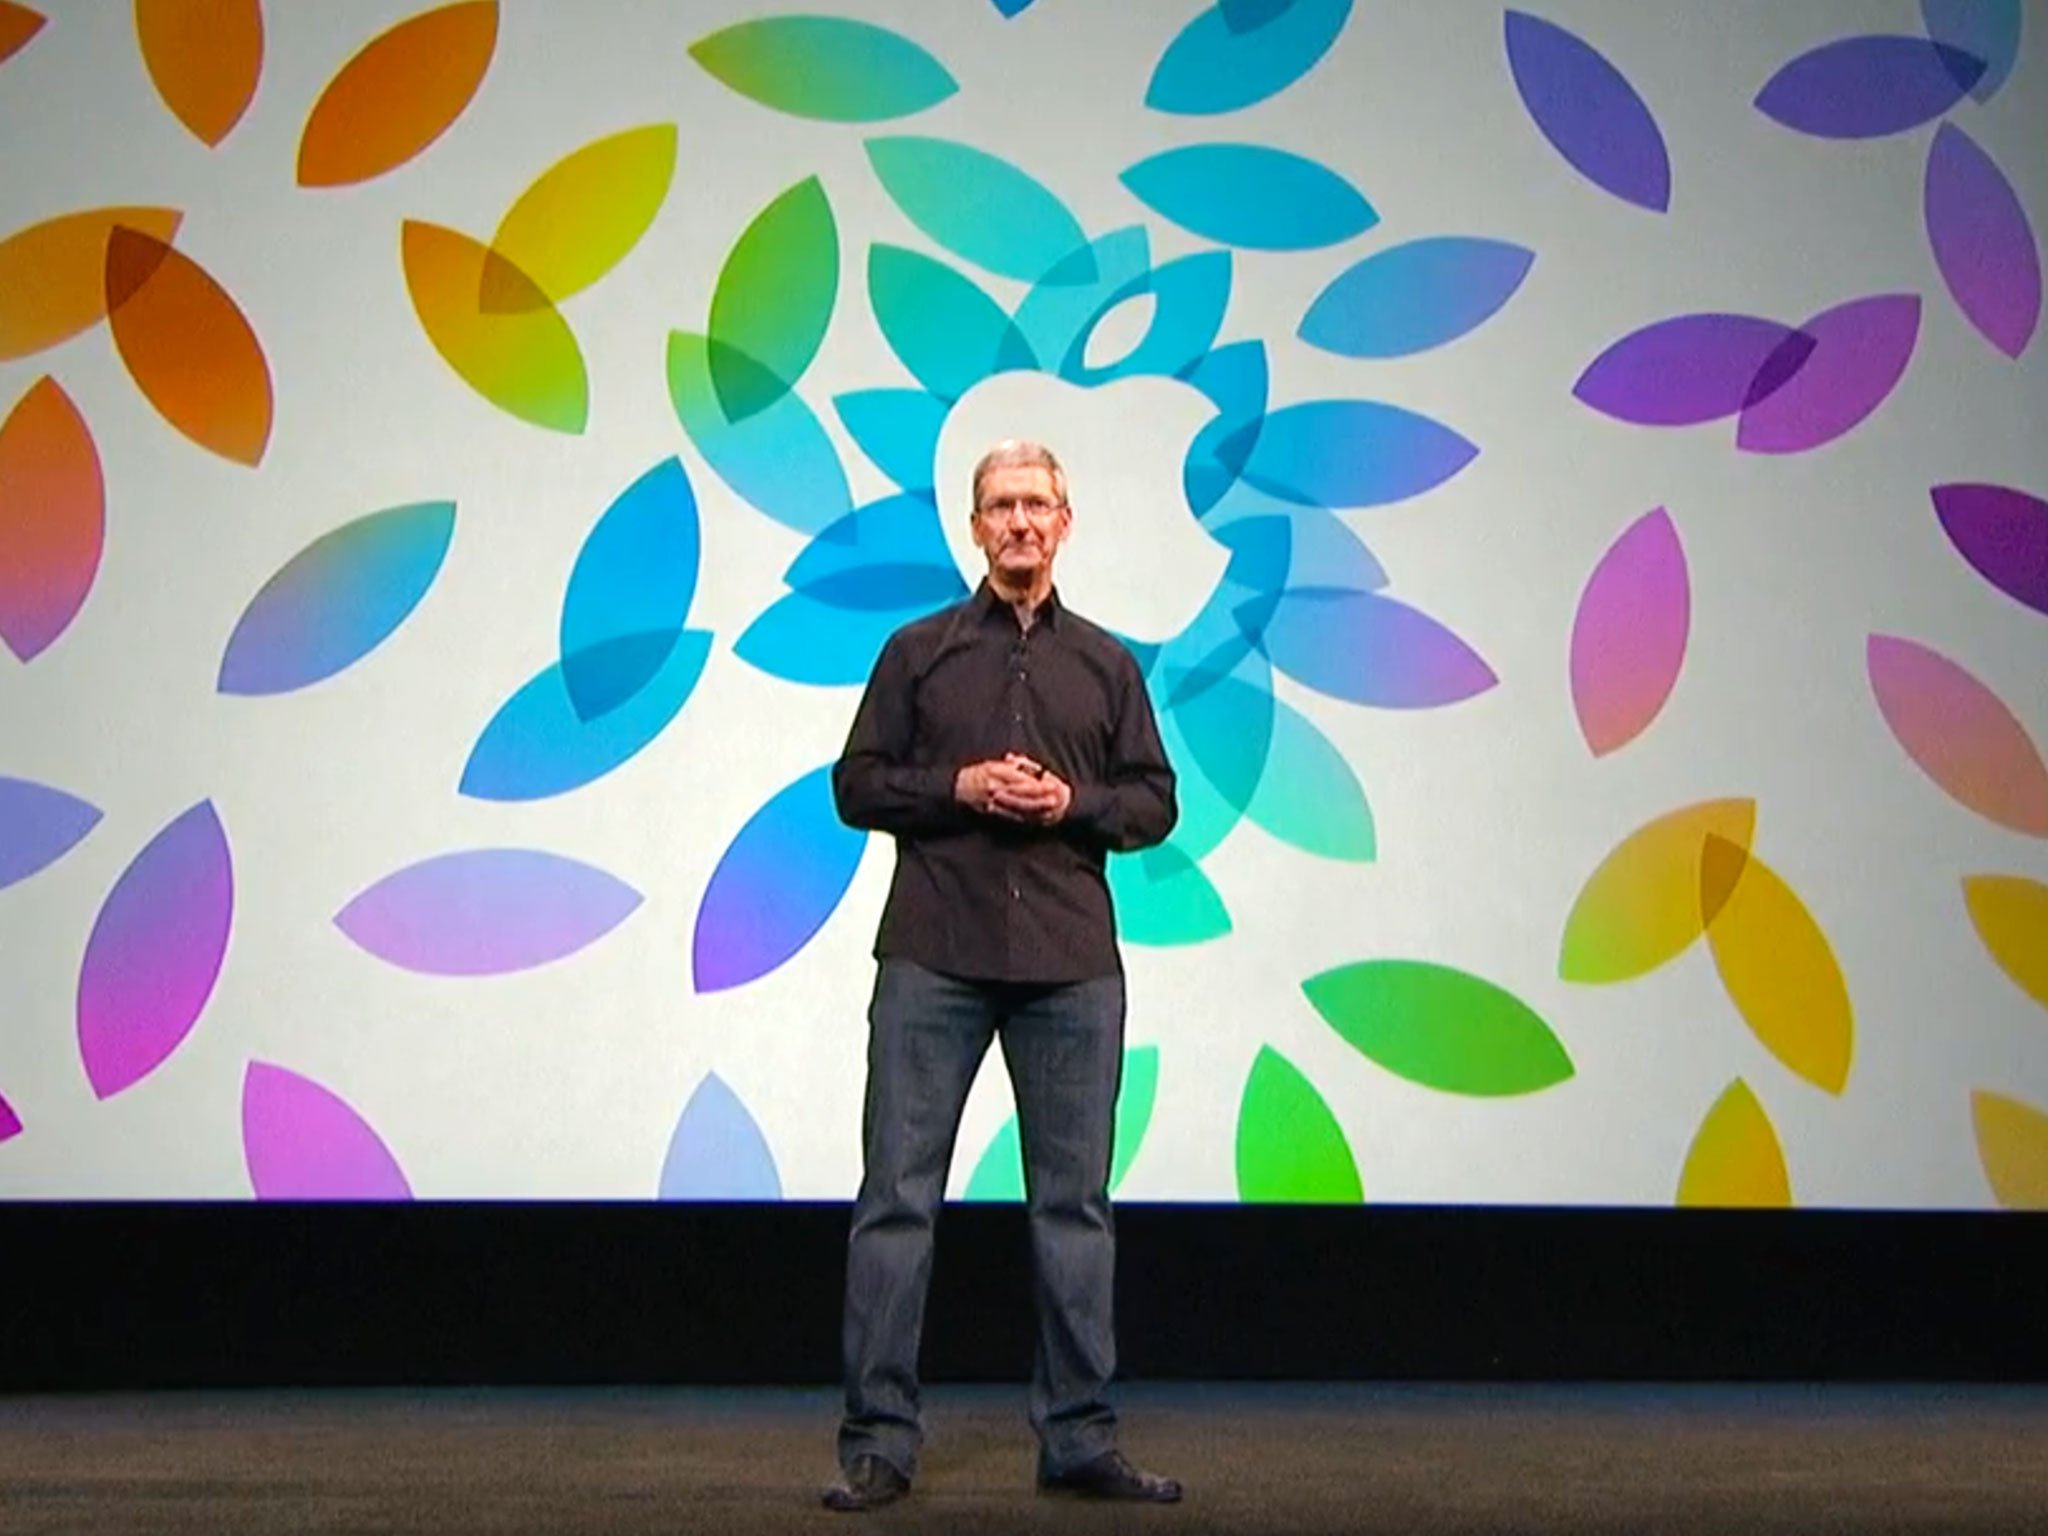 Tim Cook says Apple will add more security alerts, broaden 2-step verification, increase awareness